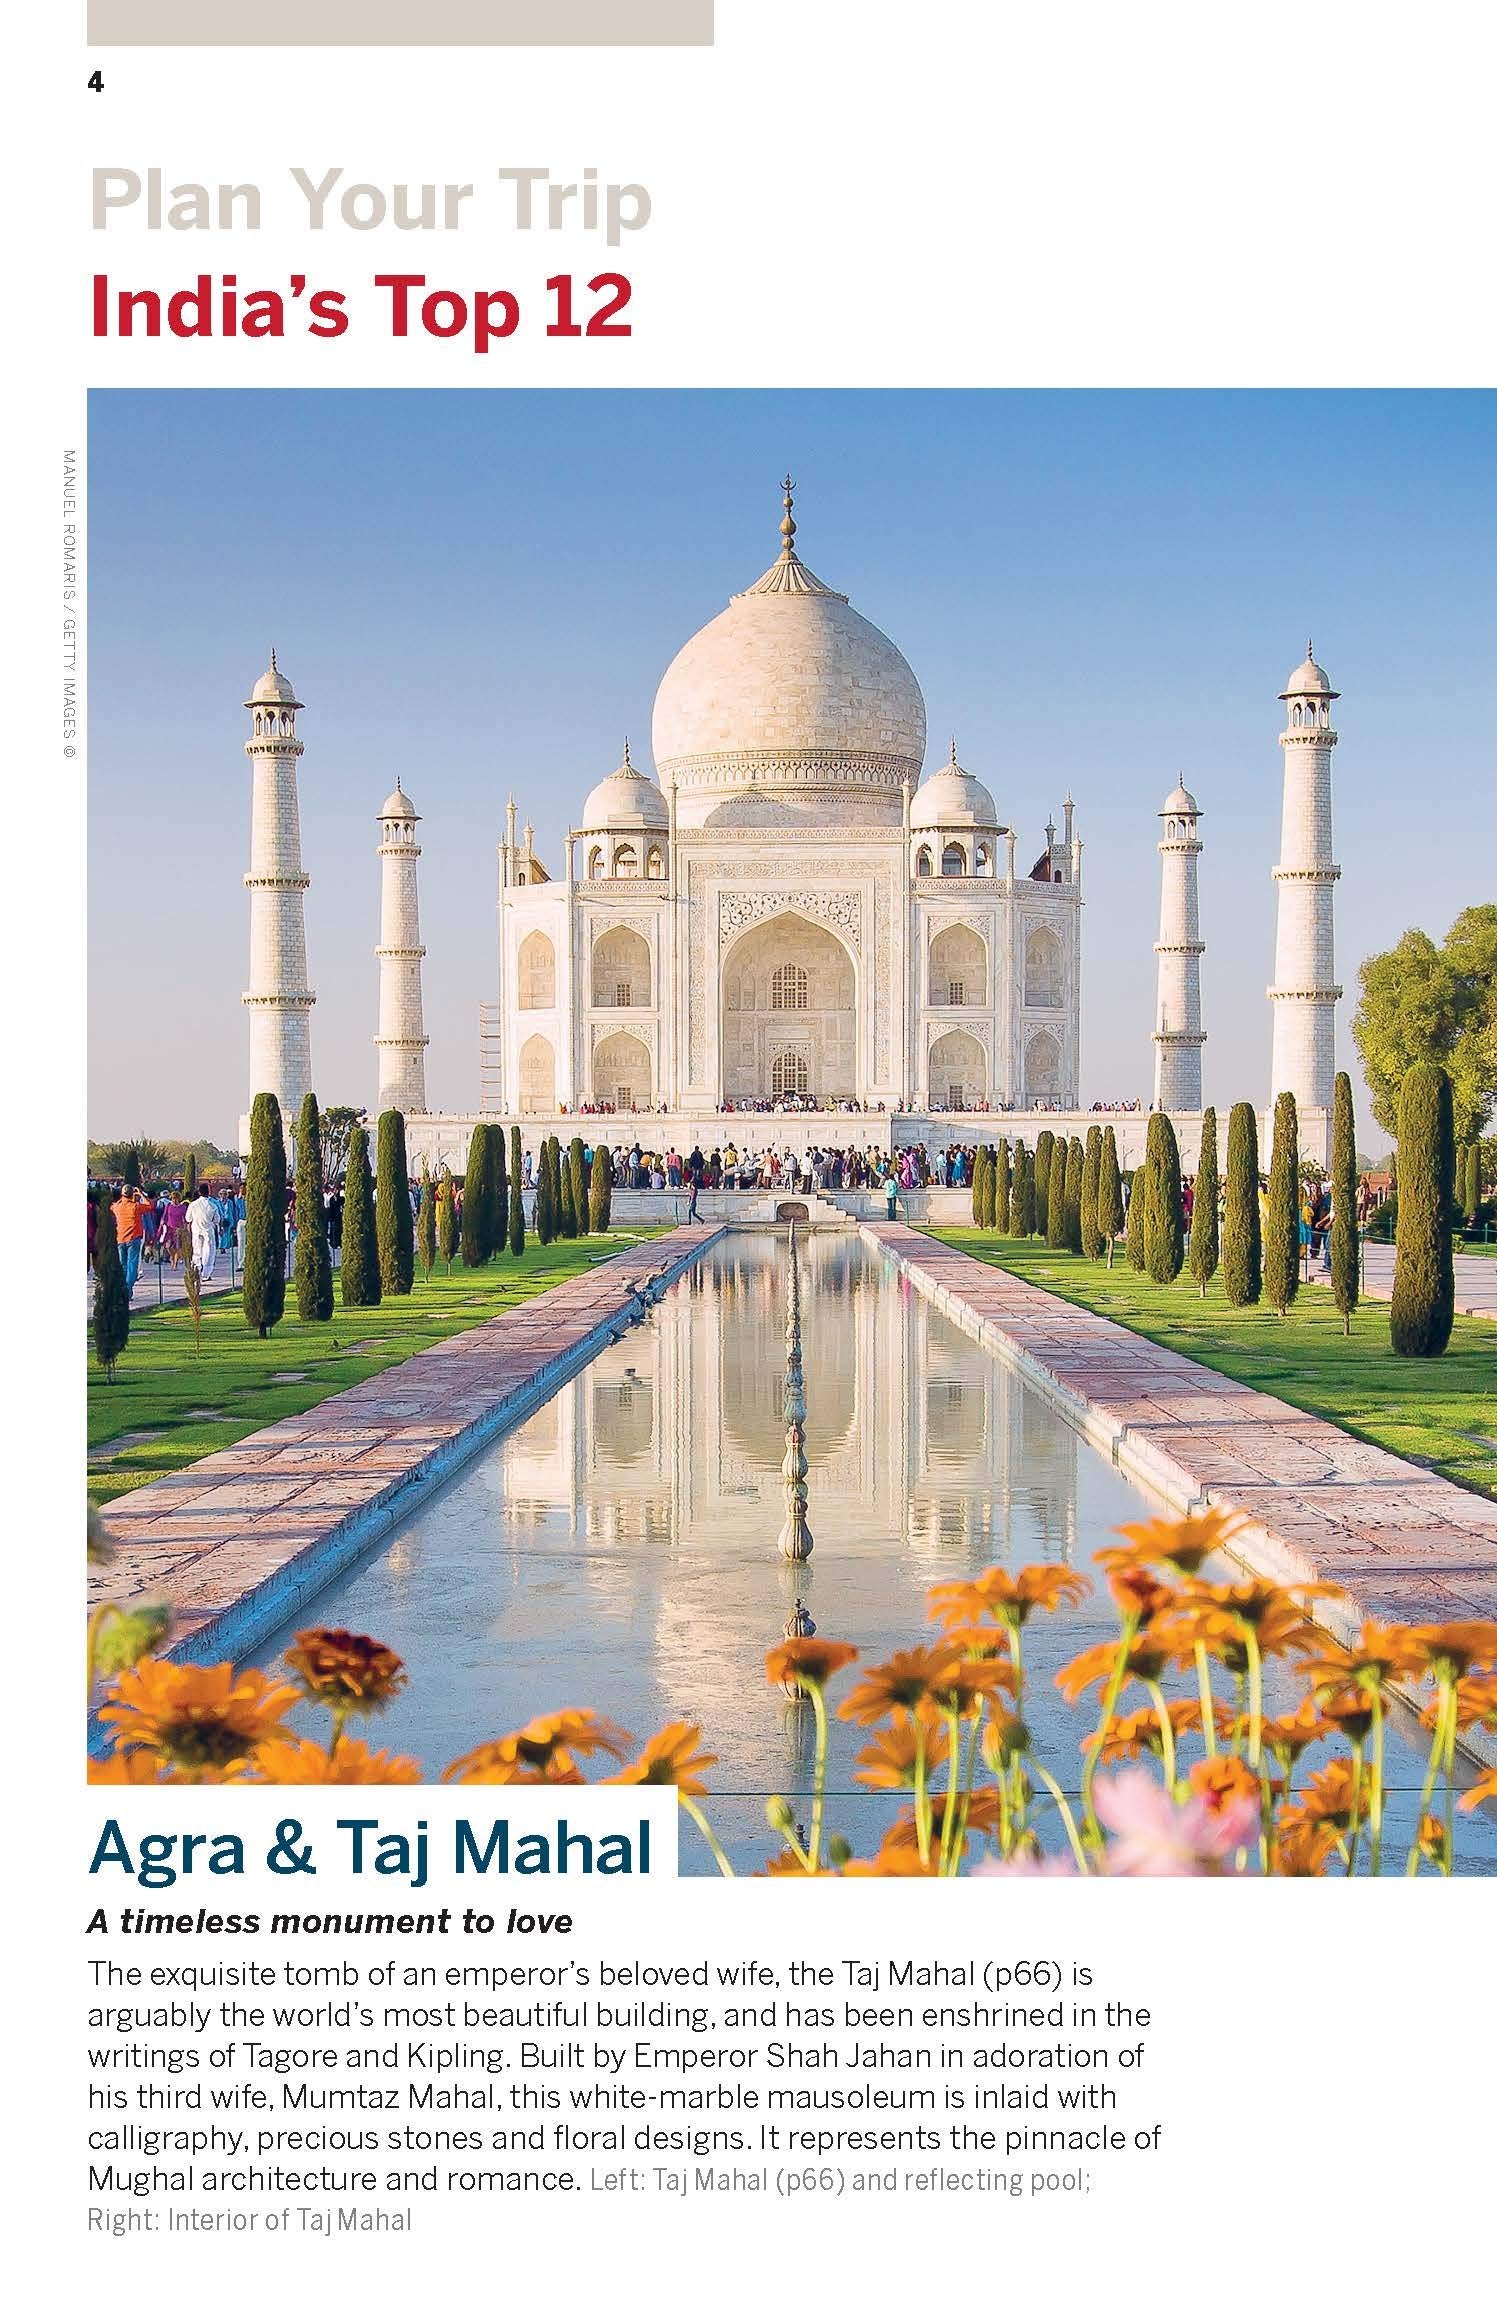 Best of India Lonely Planet 2e